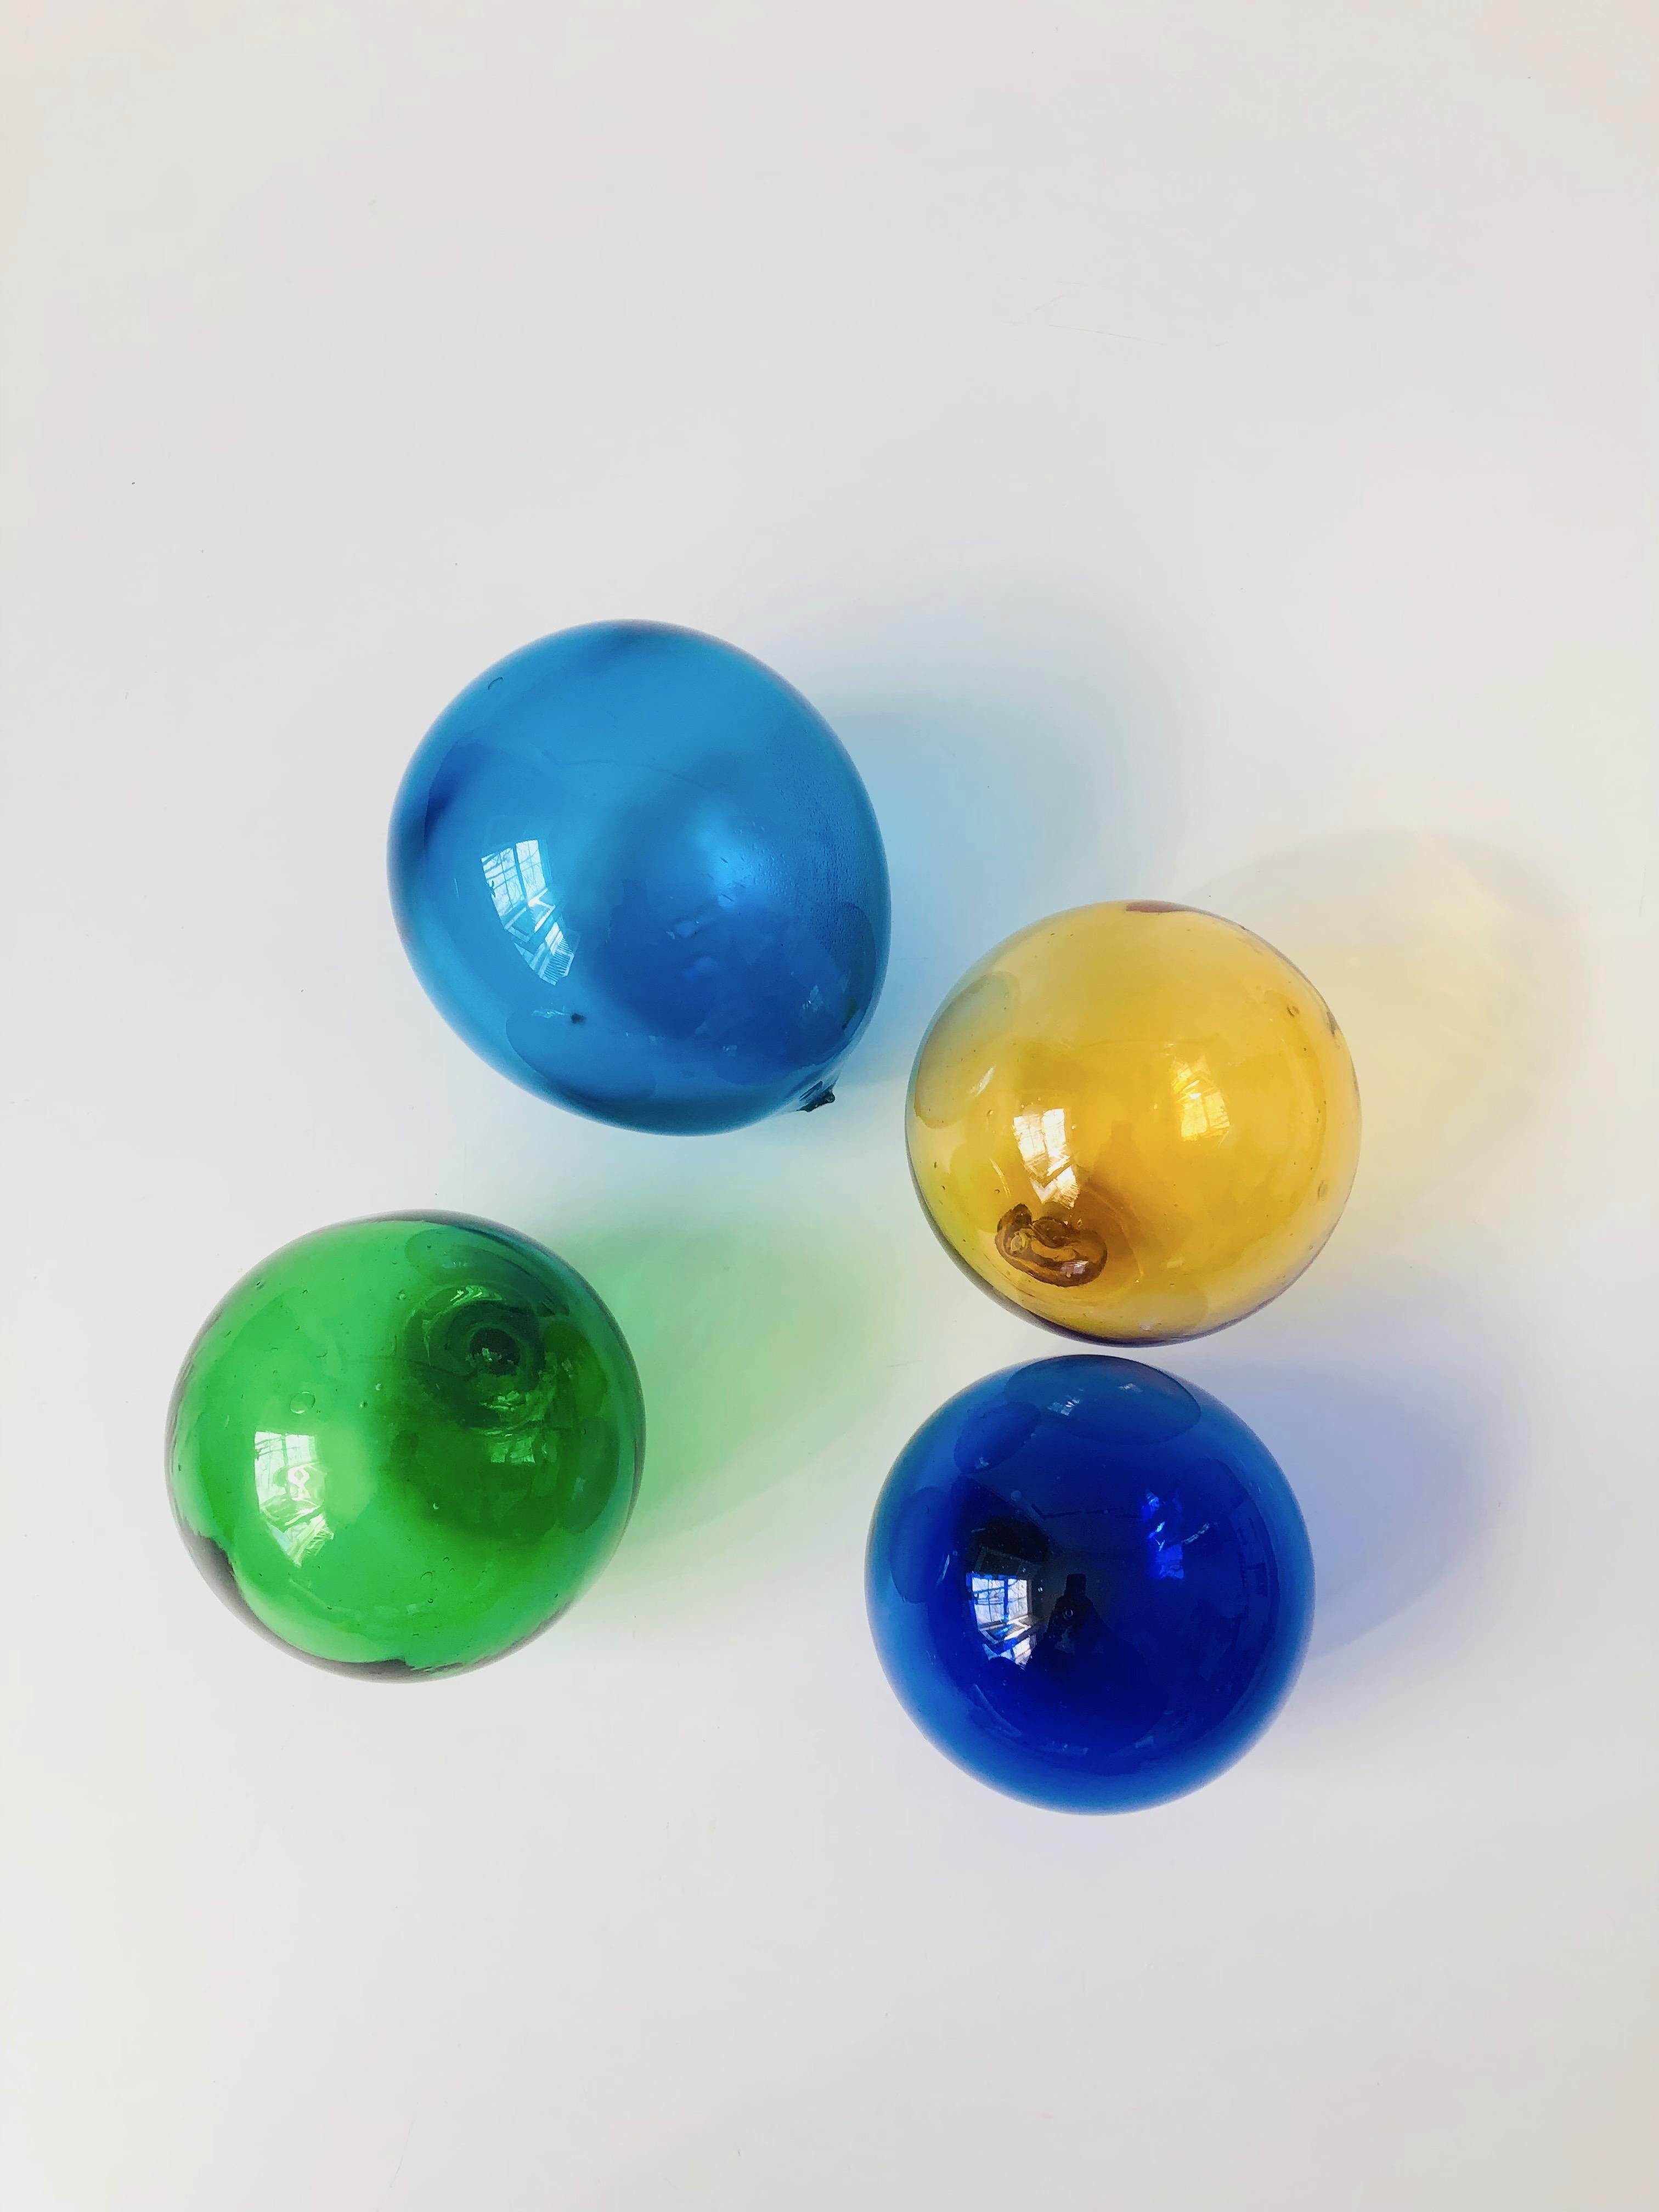 A wonderful set of 4 colorful vintage glass fishing floats. Made of blown glass in slightly varying sizes.
Measure approximately 3.5